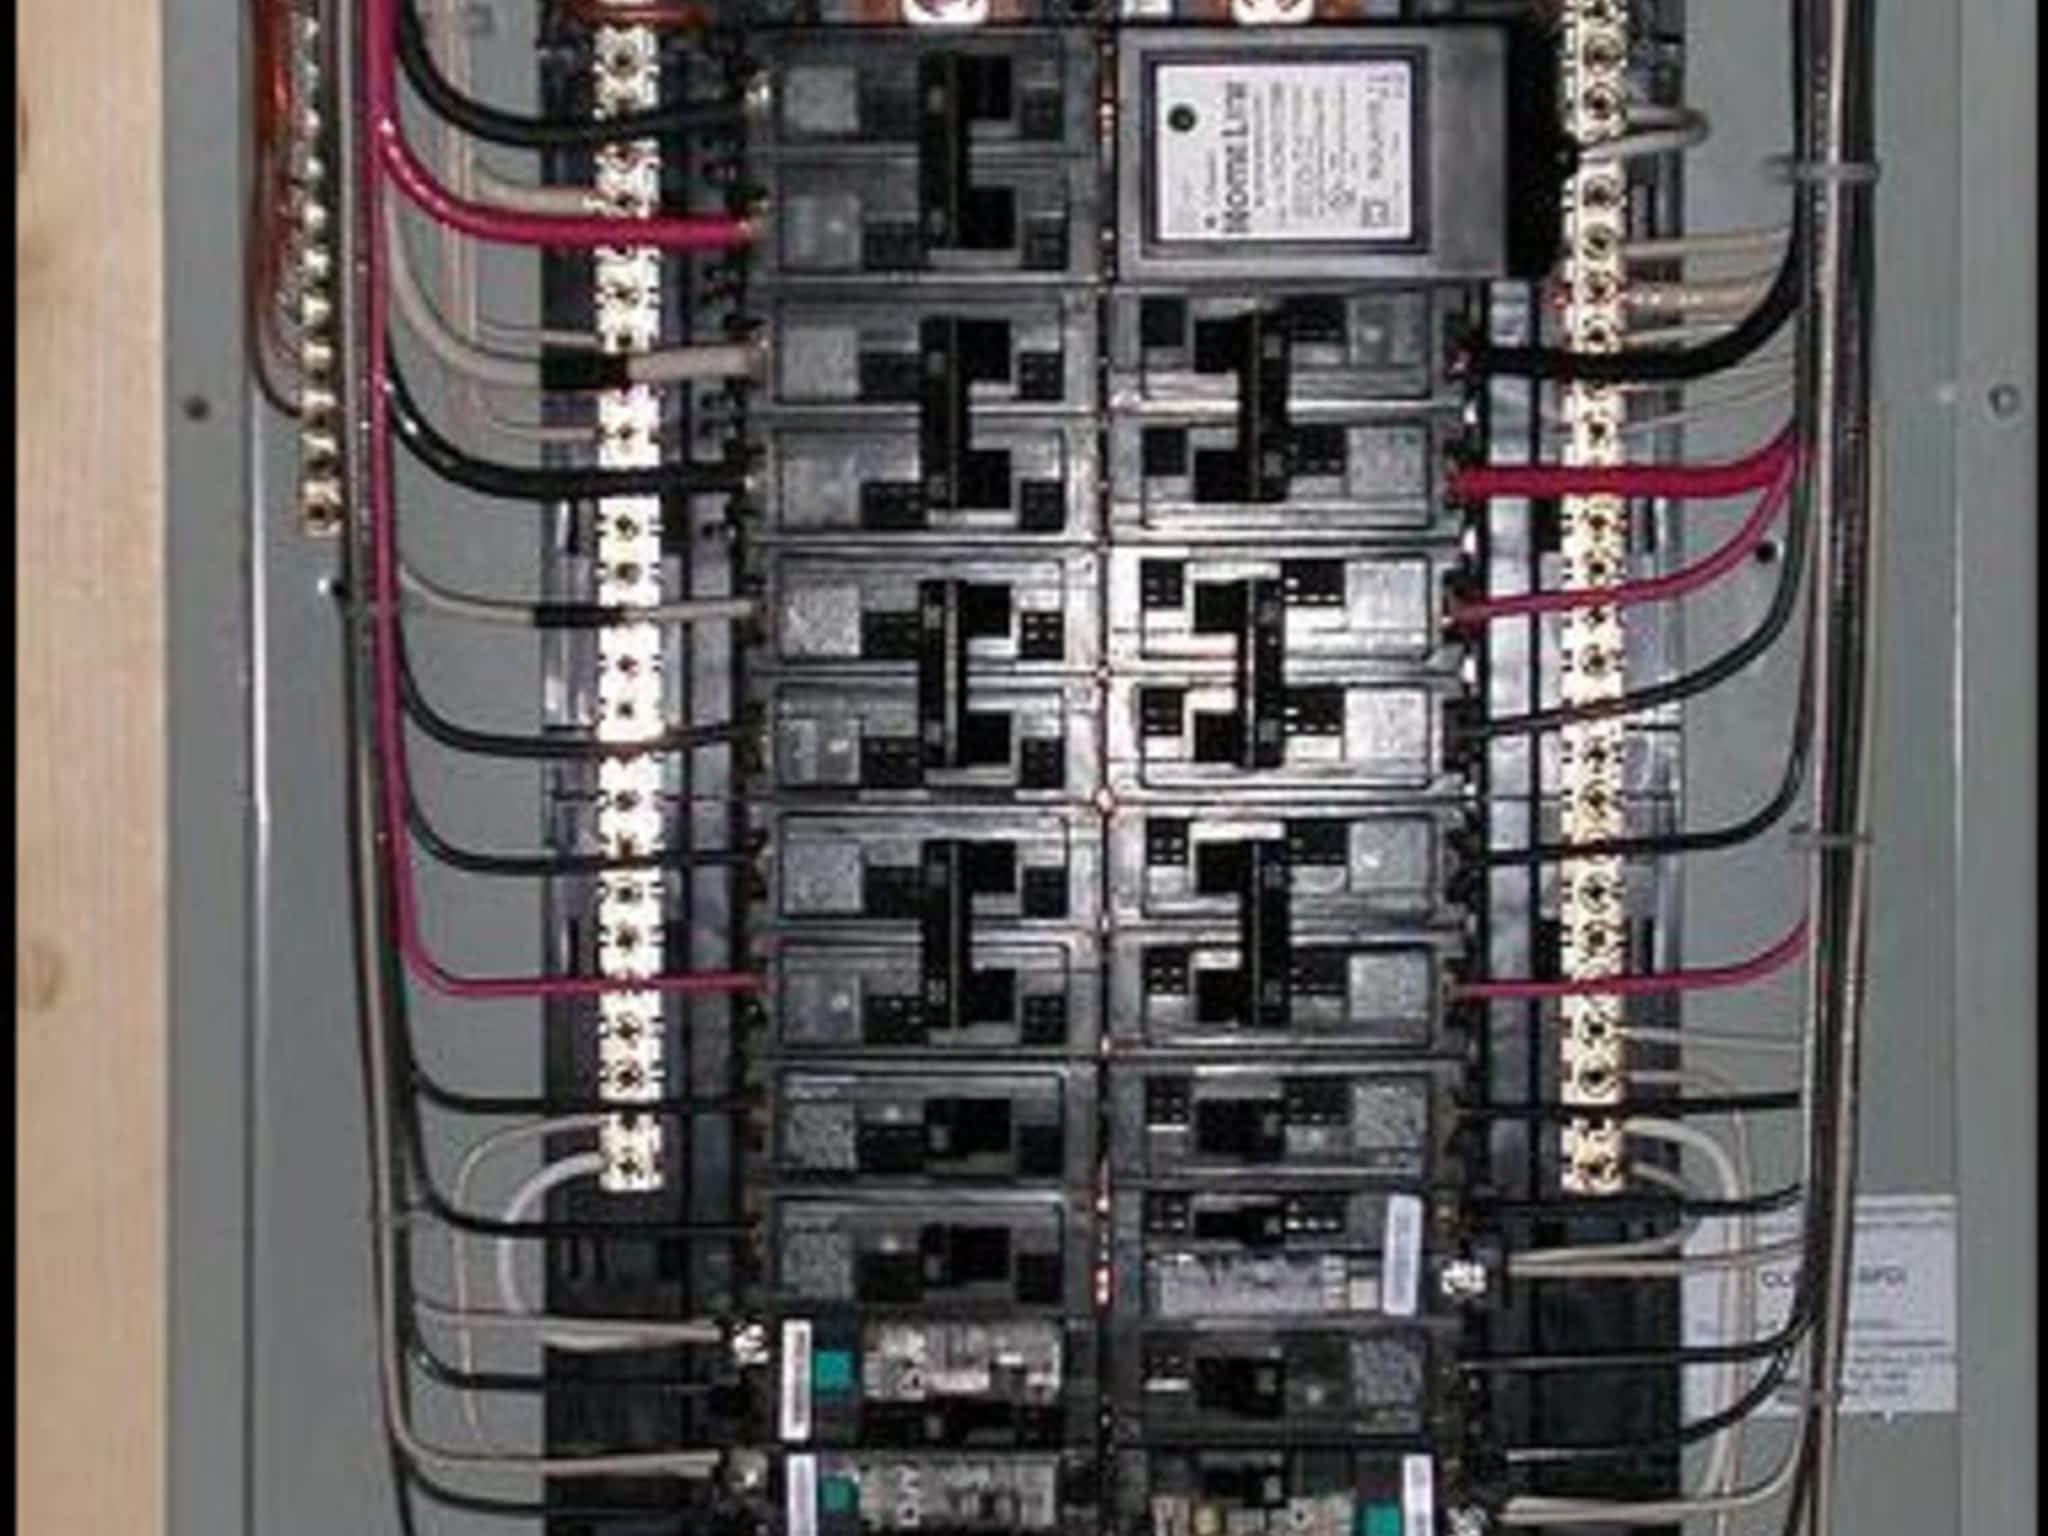 photo Kennedy Electric & Cabling